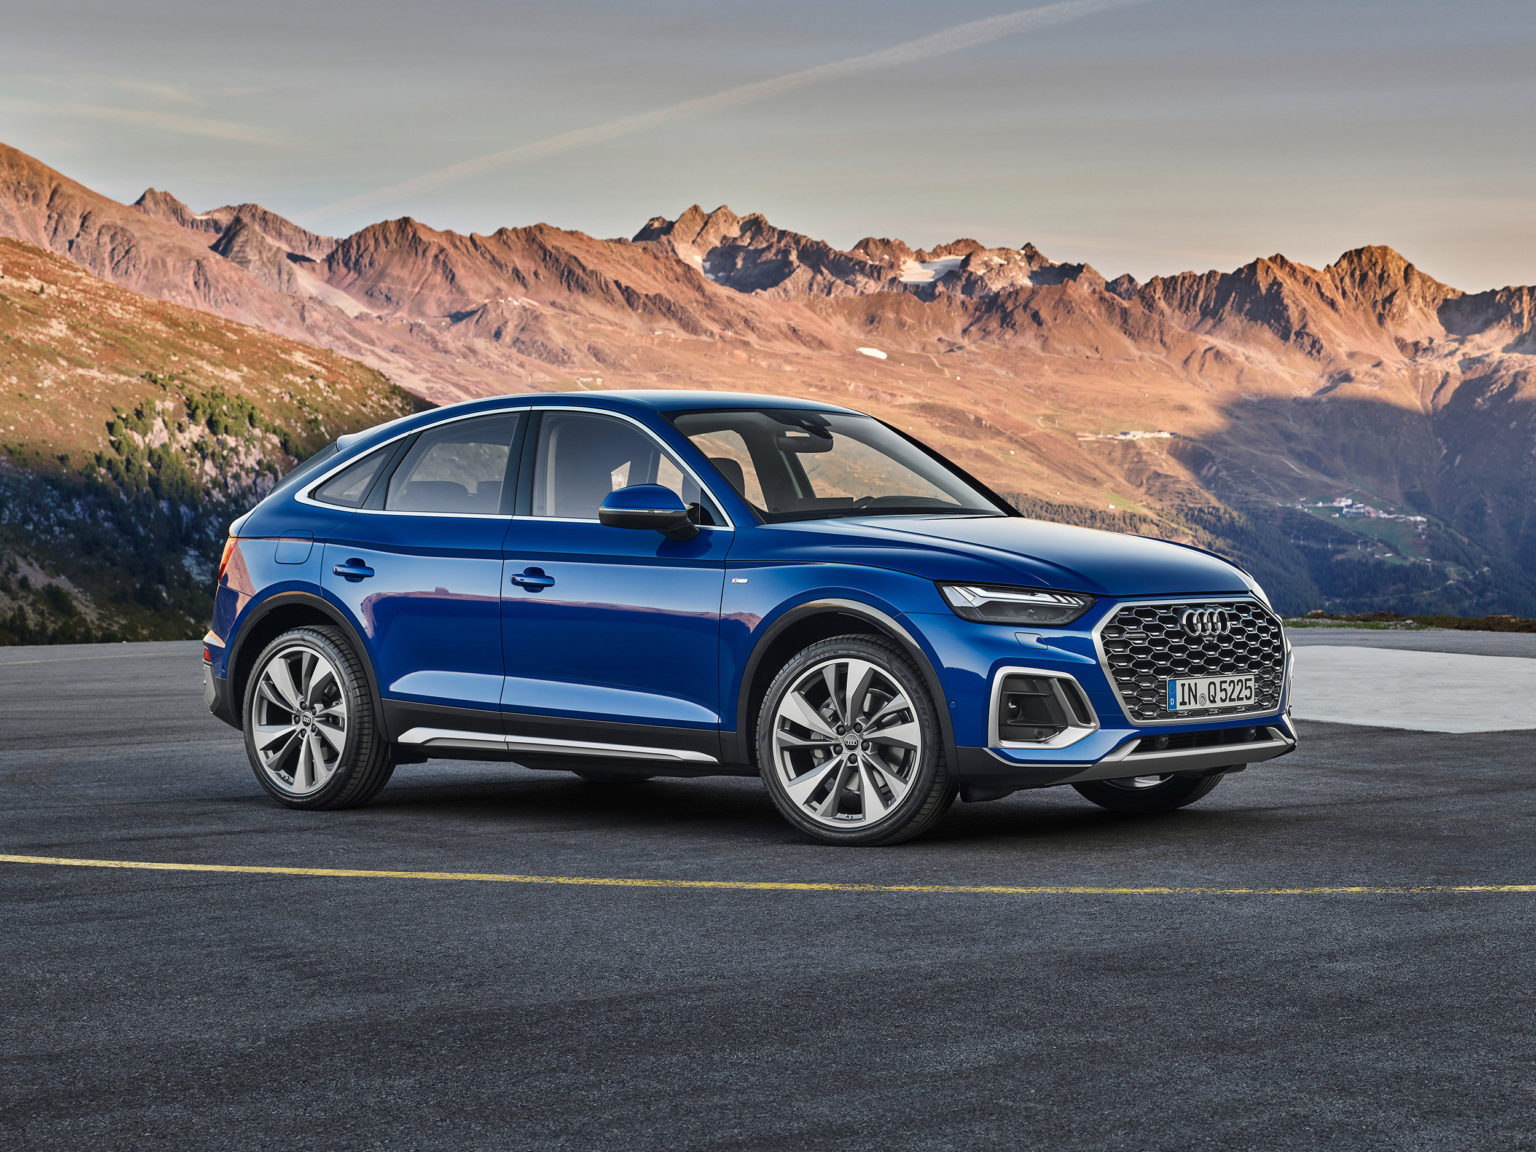 The 2022 Audi Q5 Sportback has debuted but Americans will have to wait around six months to get one.